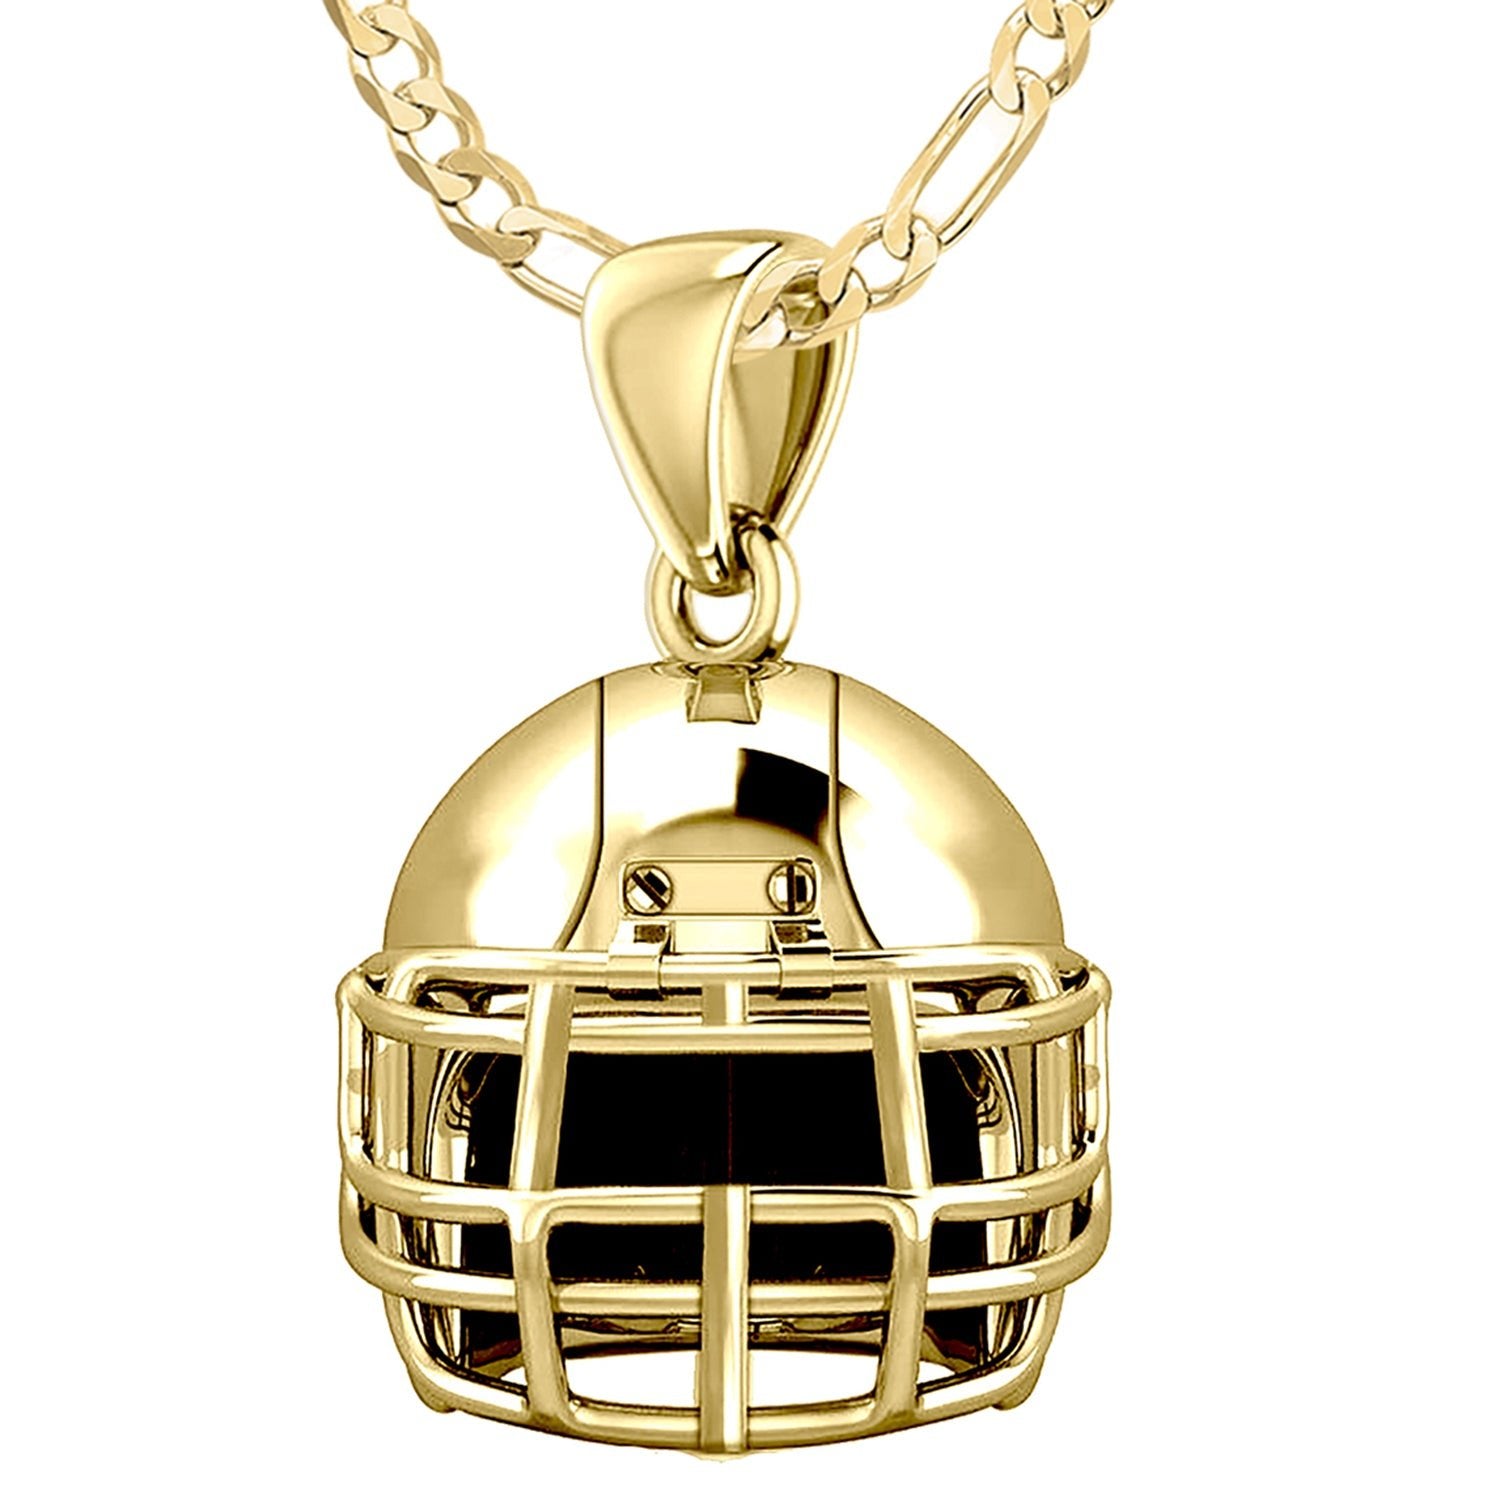 Small 10K or 14K Yellow Gold 3D Football Helmet Pendant Necklace, 16.5mm -  10k Yellow Gold / 18in, 2.2mm Figaro Chain